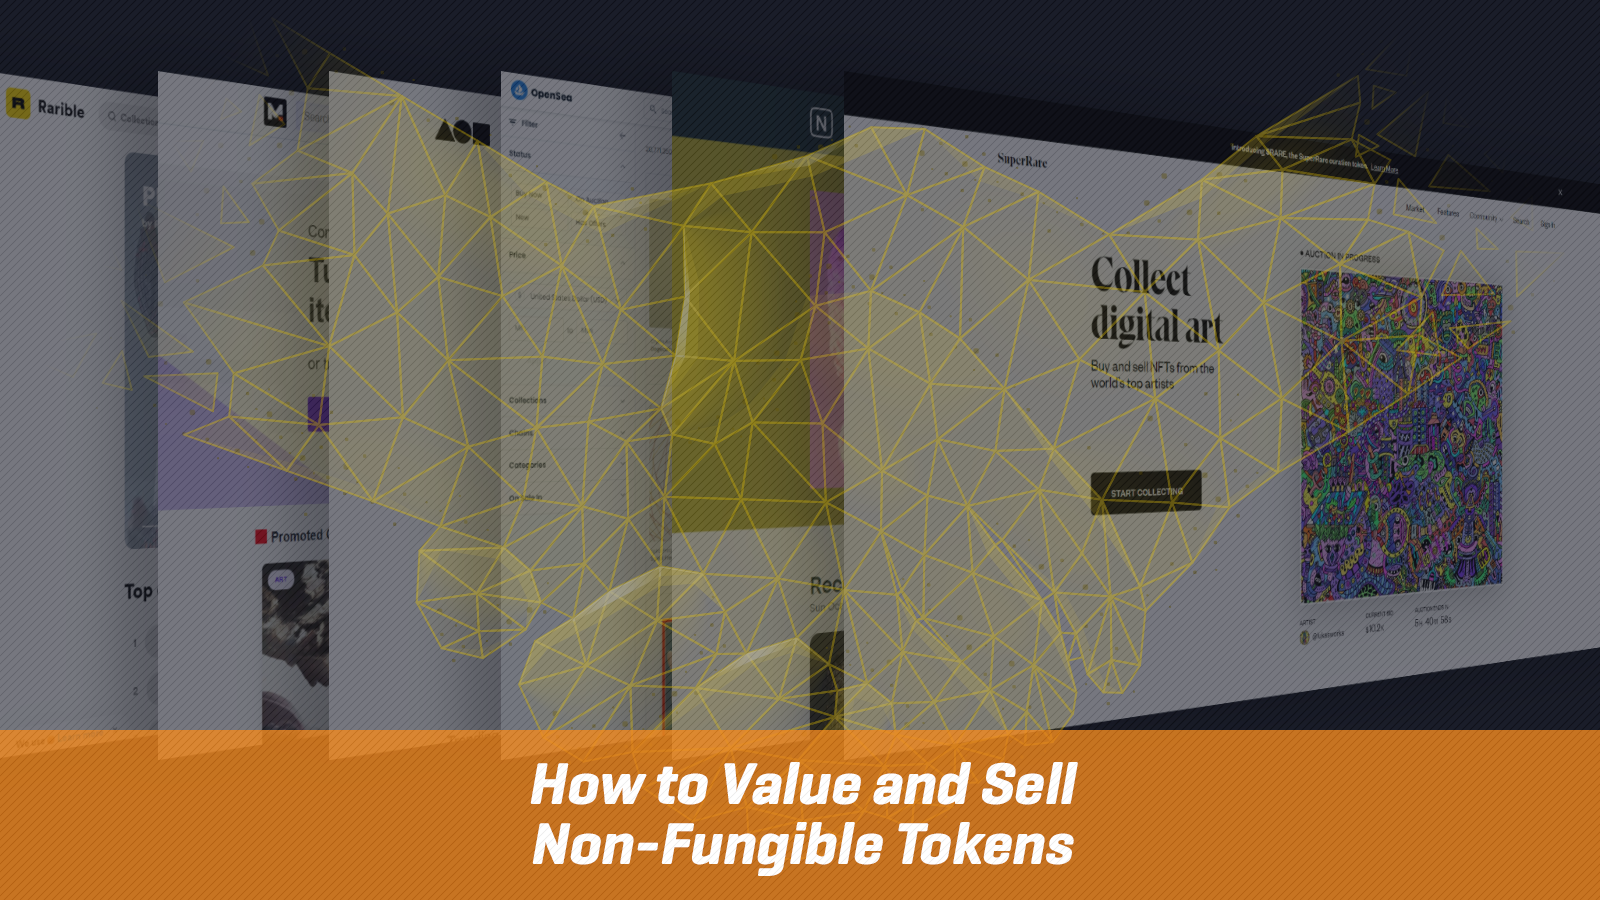 How to Value and Sell Non-Fungible Tokens